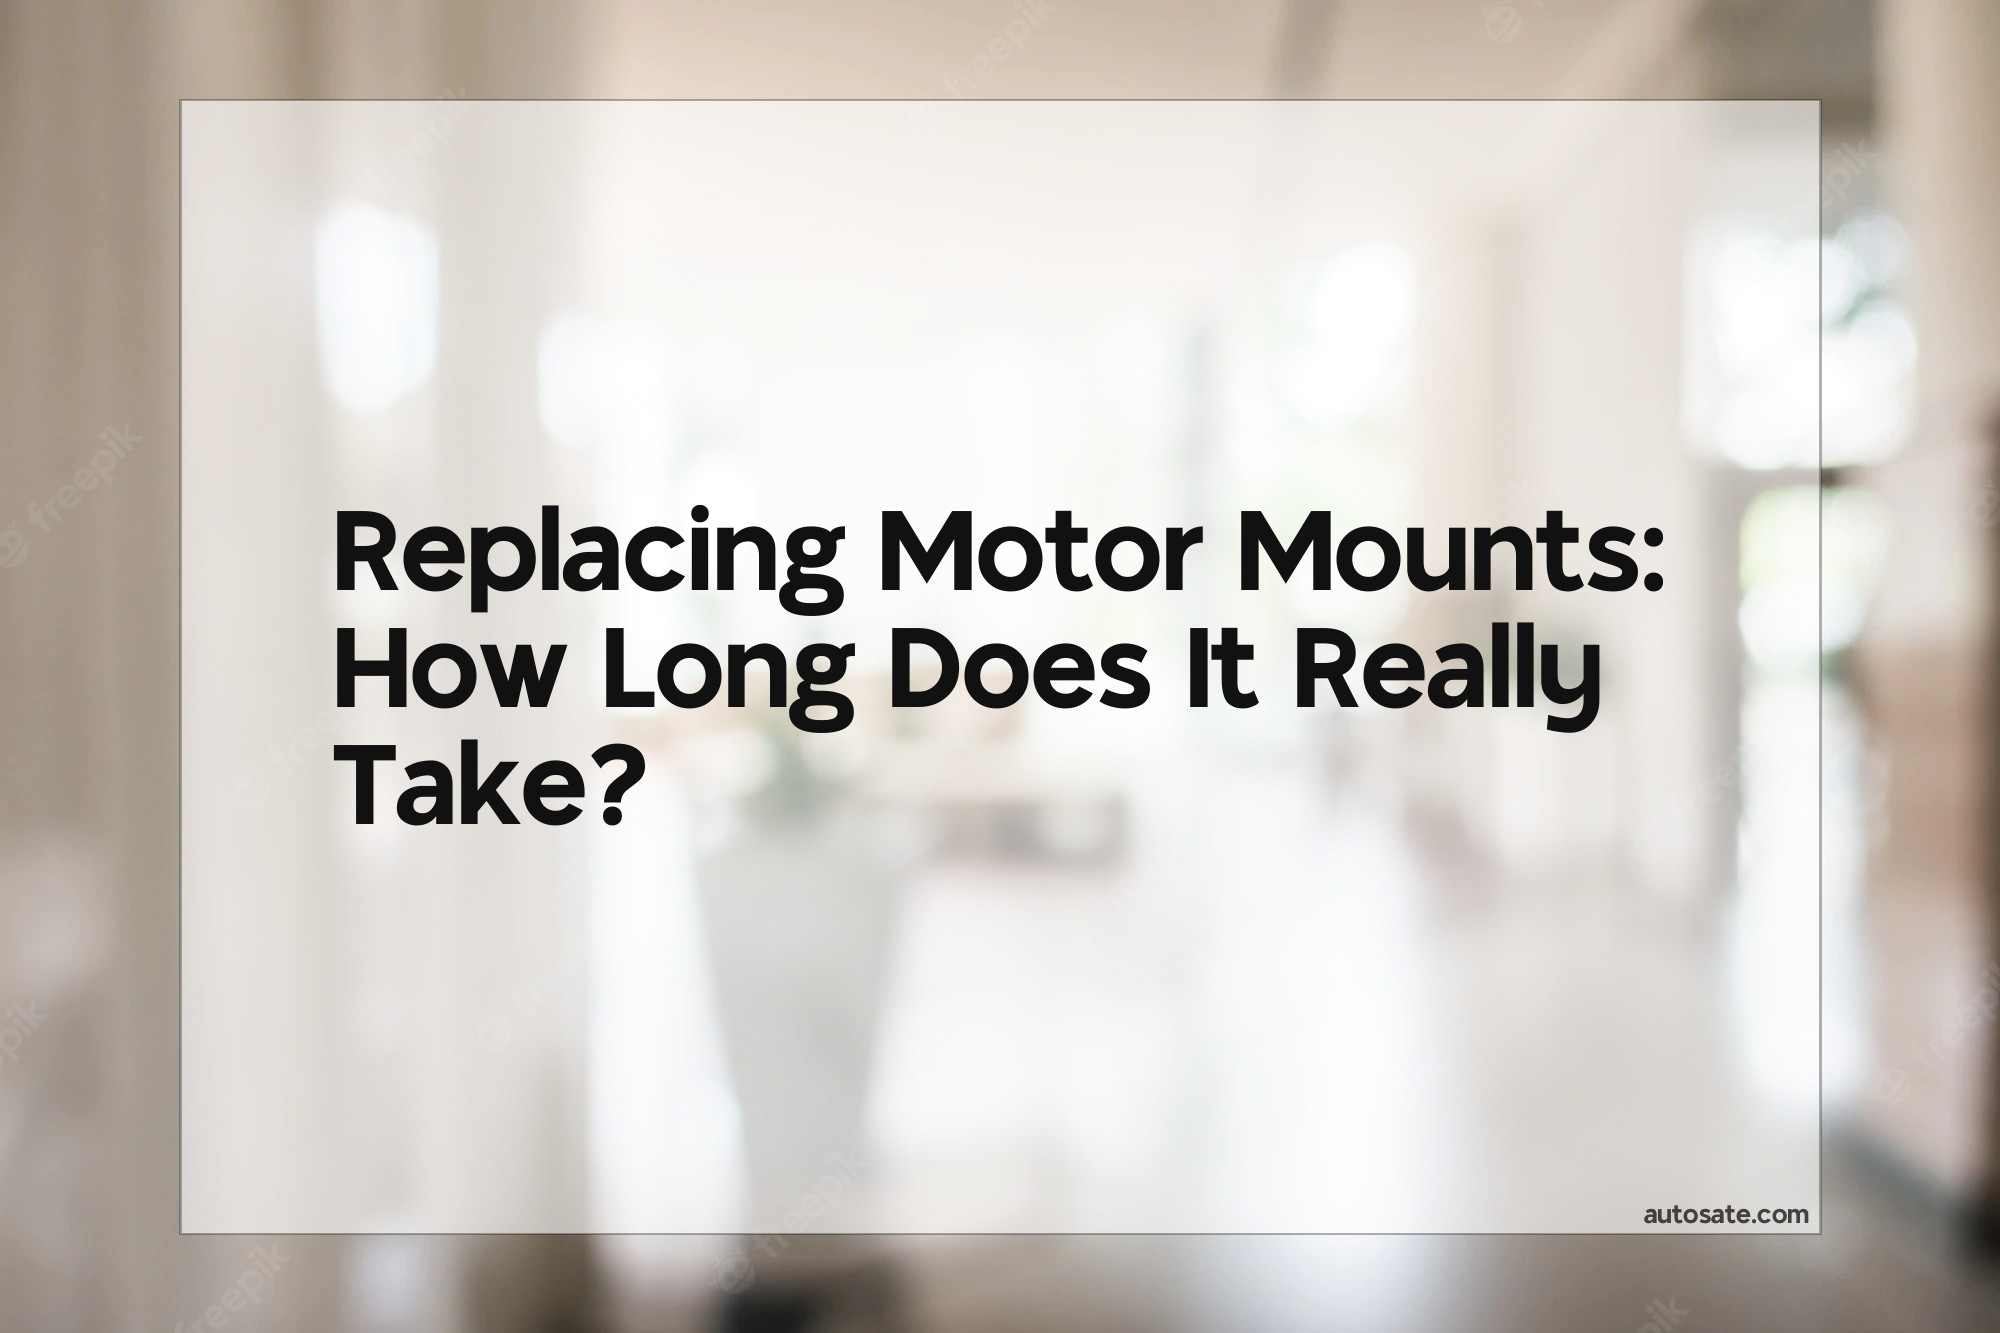 Replacing Motor Mounts: How Long Does It Really Take?